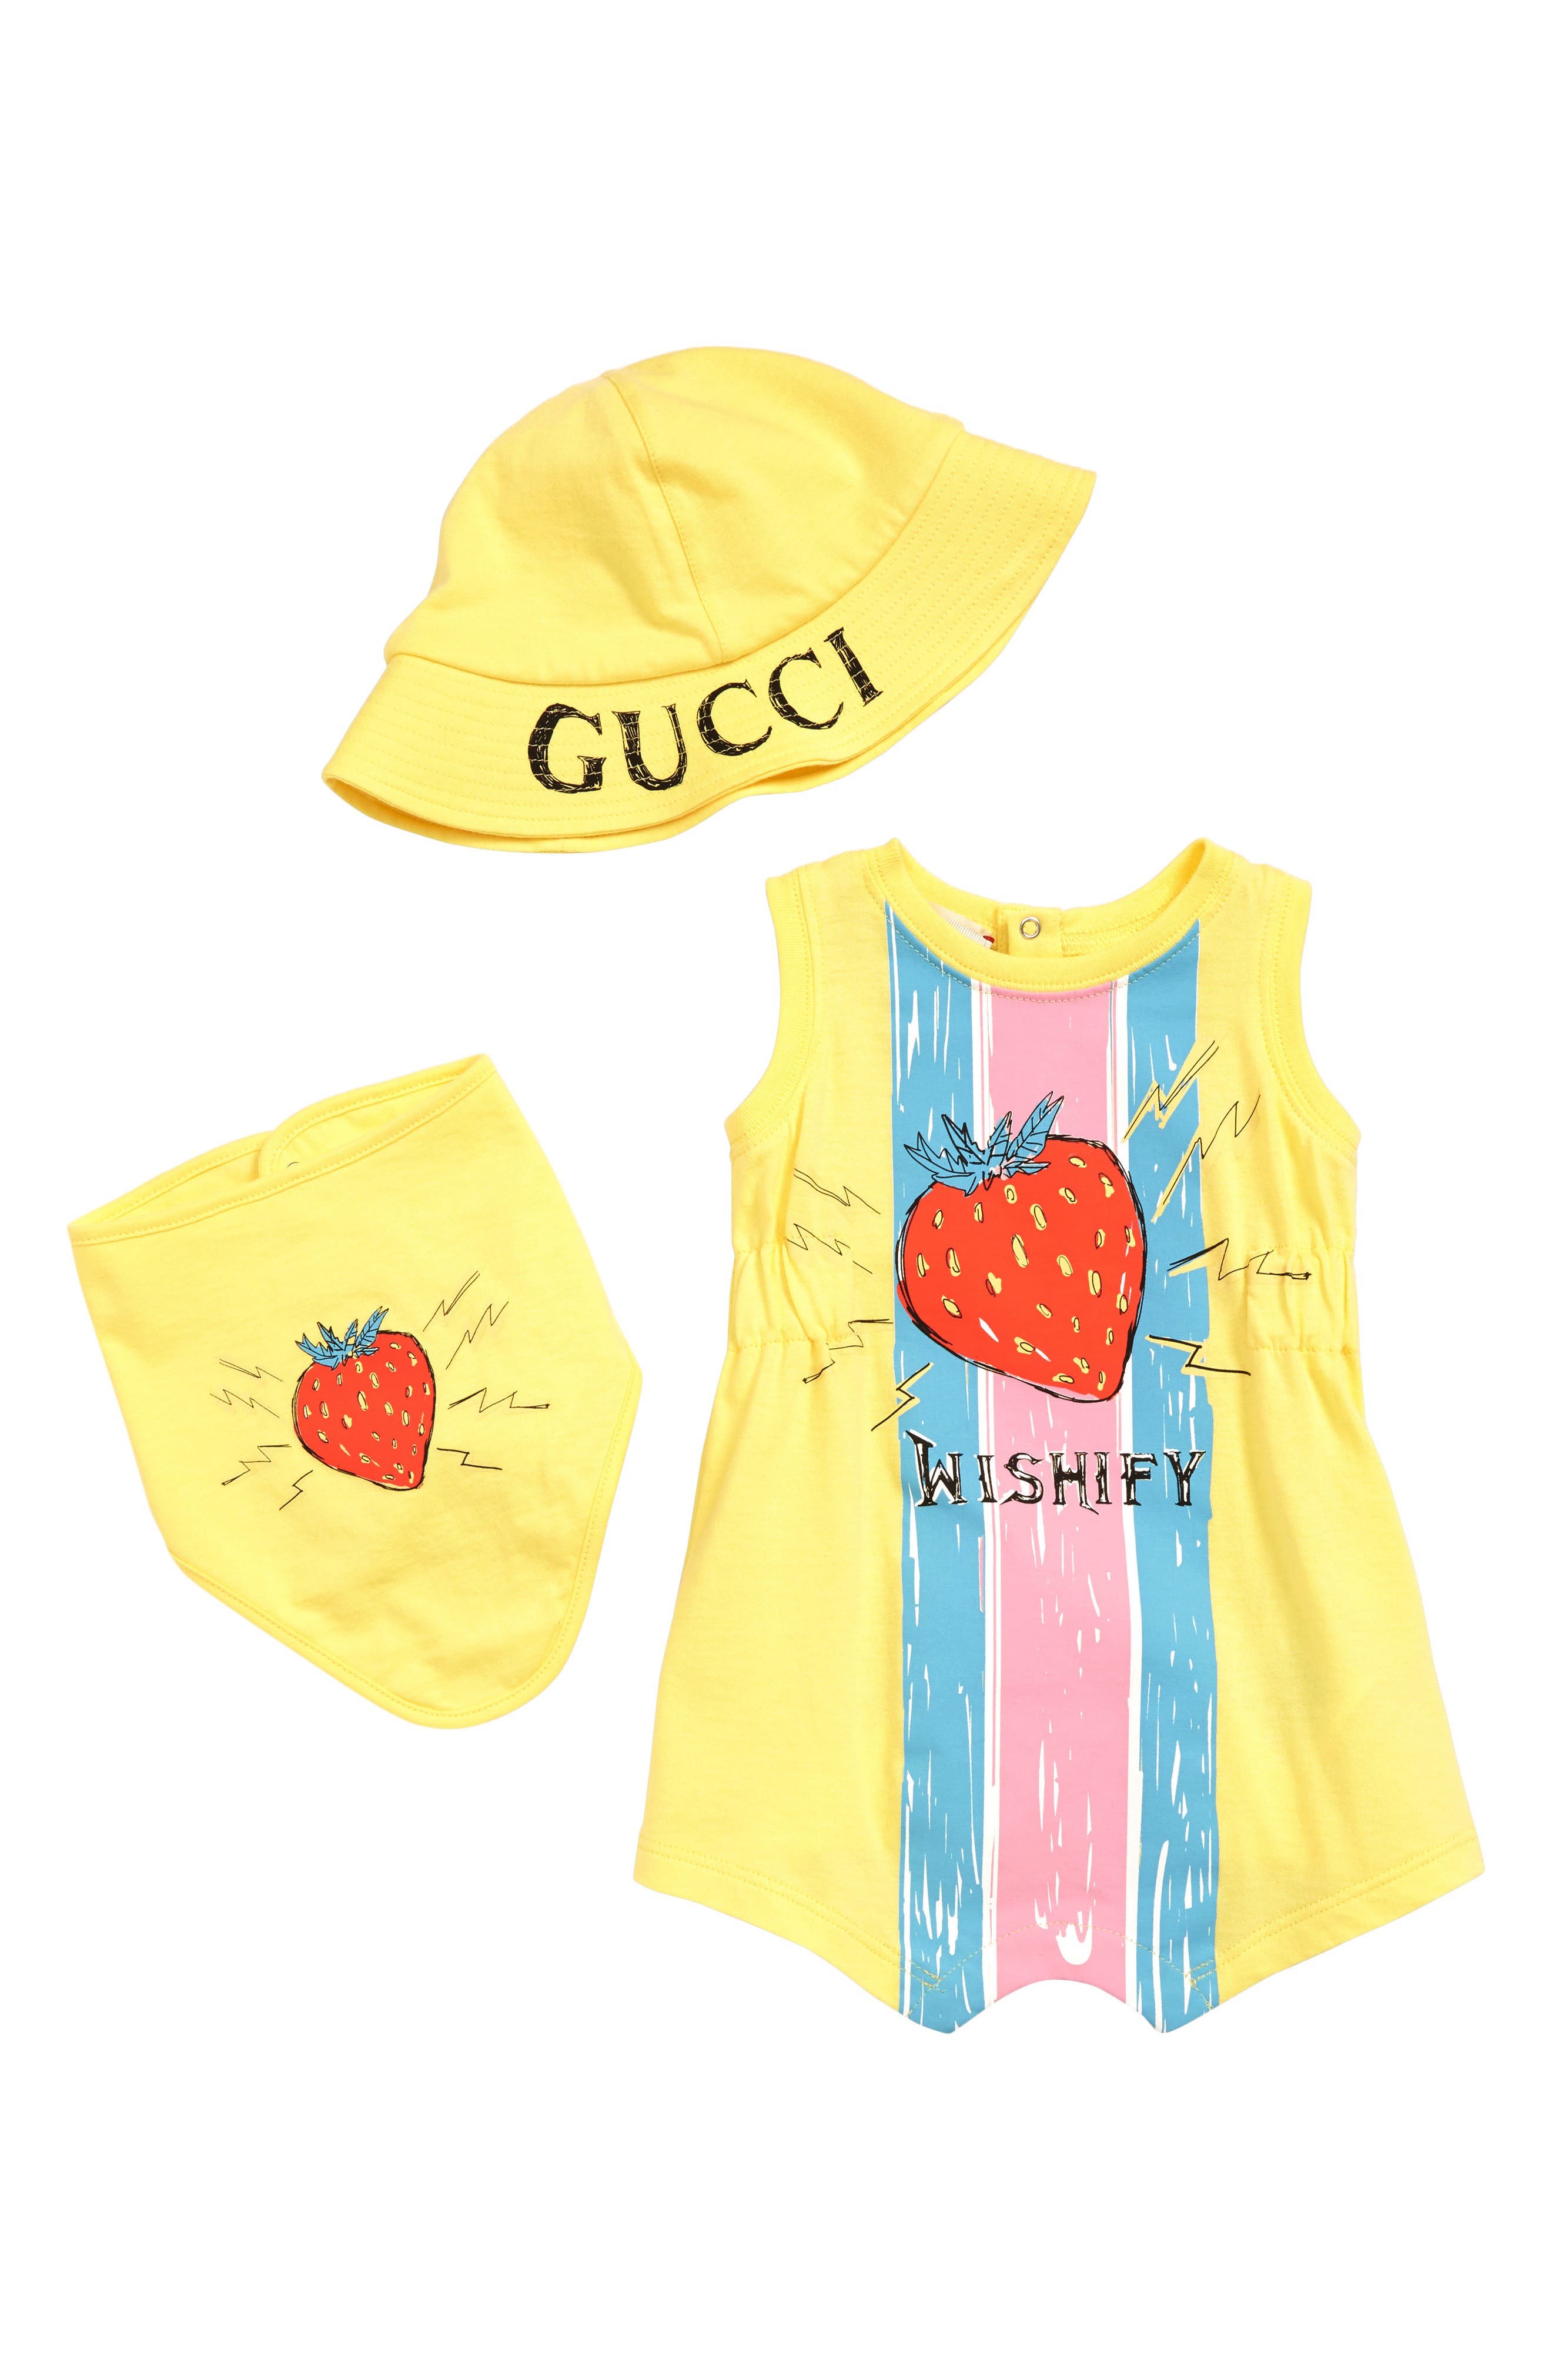 gucci outfit for newborn